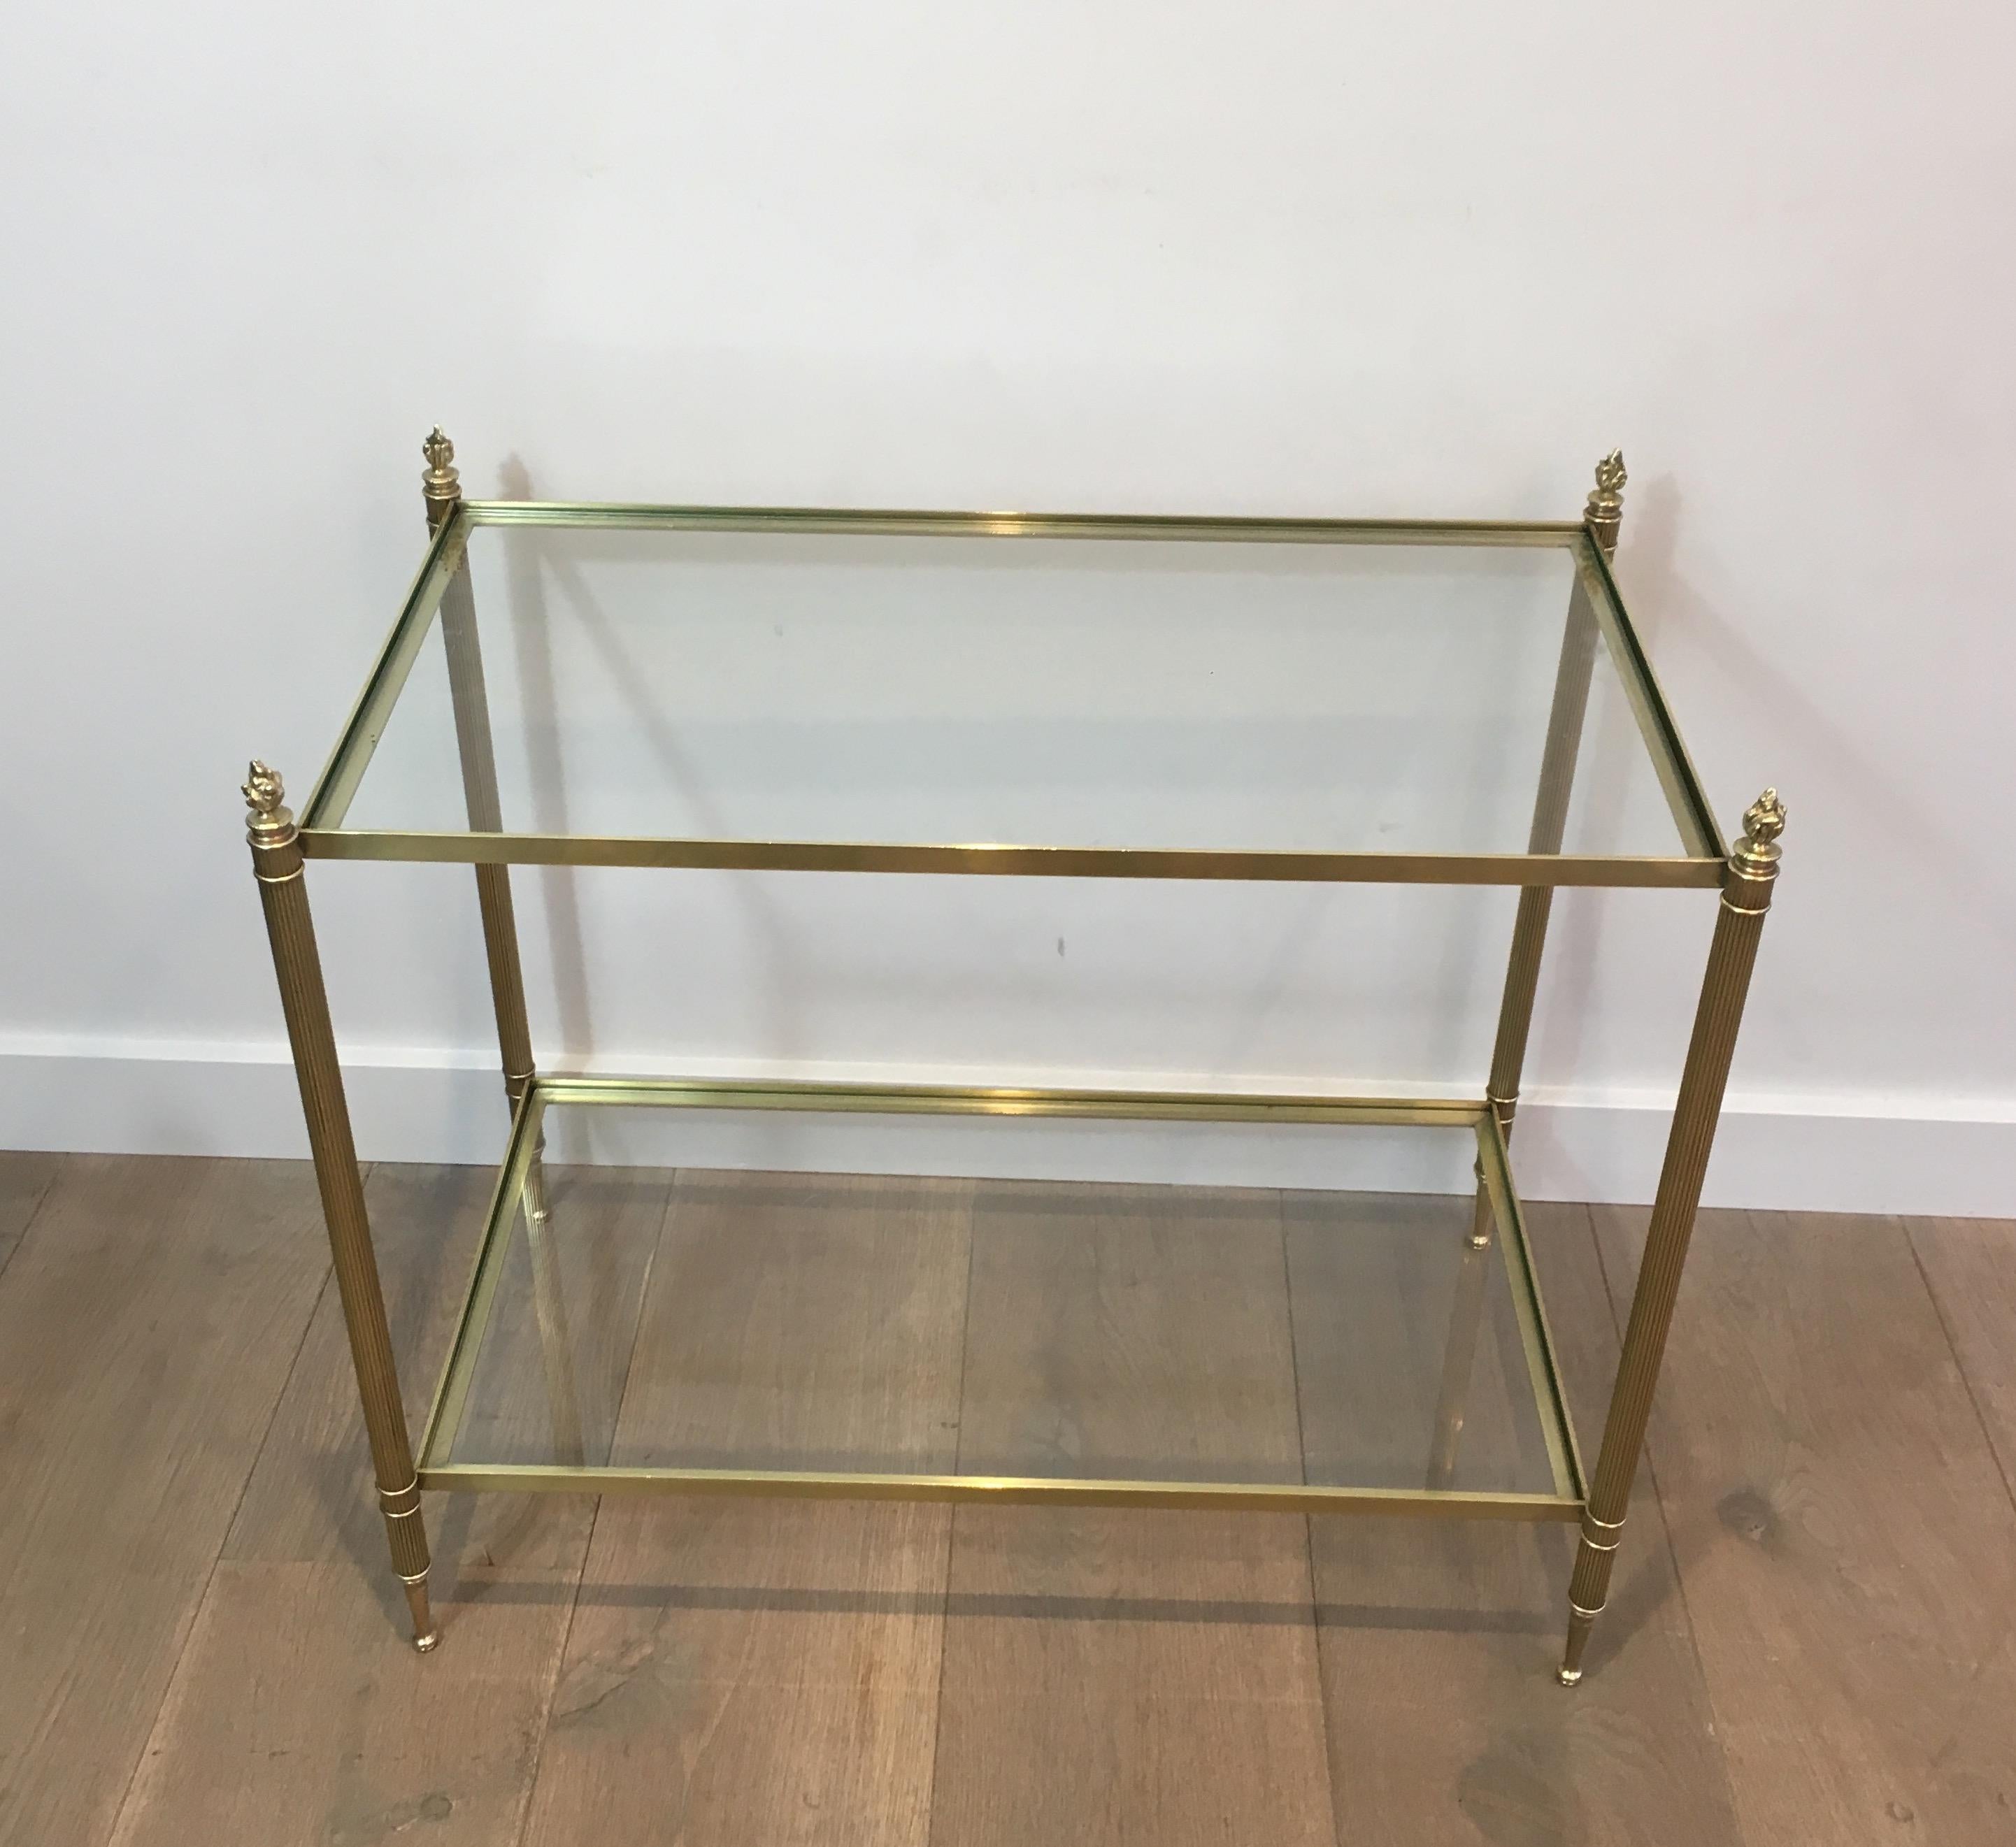 Maison Bagués, Faux Bamboo Bronze Side Table with Original Eglomised Mirror, Fre 2